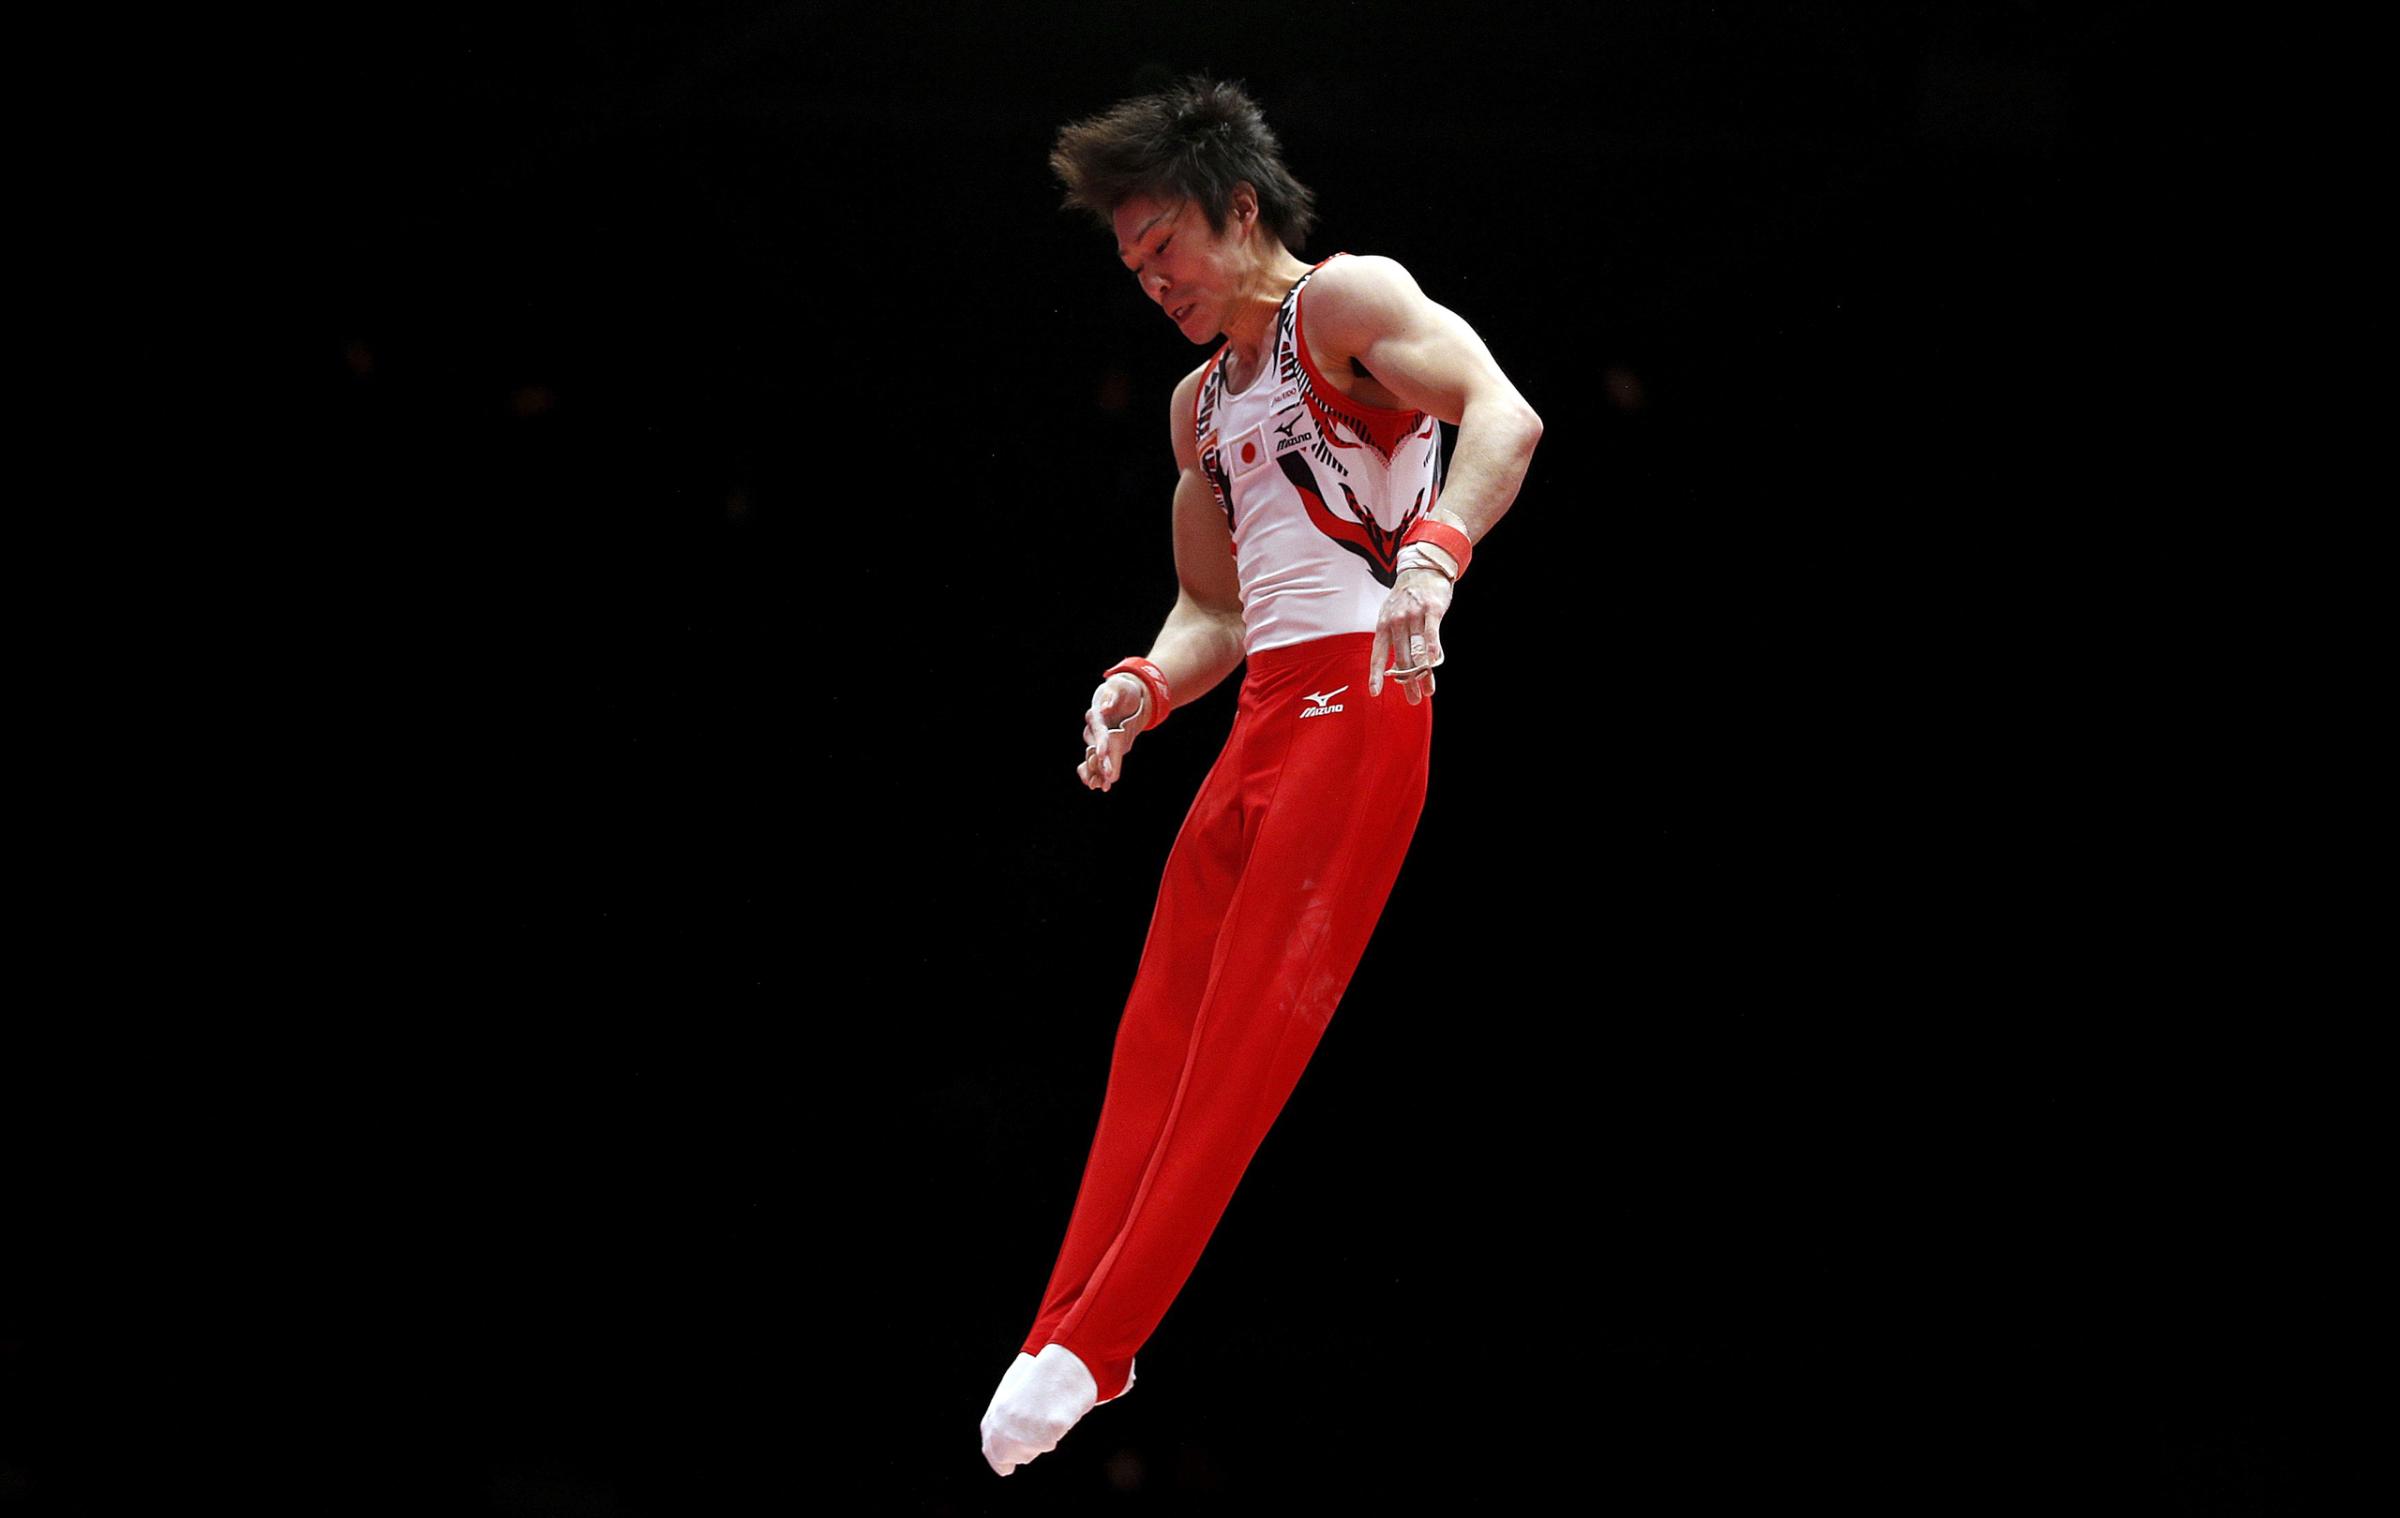 Kohei Uchimura—Tokyo’s summer heat has infiltrated the national training center, rendering bows a little sticky and dismounts a little slack. But Kohei Uchimura, the defending Olympic all-around title holder, lands his jumps with a panther poise that belies their caliber of diffi-culty. He does not appear to sweat. Uchimura—who boasts six consecutive all-around world titles, double that of any other tumbler in history—is quite possibly the greatest male gymnast of all time. “With today’s scoring,” he says, “if you don’t move like a robot or a machine, you won’t get the points.” But Uchimura also brings artistry to accuracy. The son of two gymnasts and brother to another, his destiny was set at the age of 3, when he began tumbling at his parents’ gym in the southern city of Nagasaki. Today at 27, he might seem geriatric in the callow world of gymnastics. Uchimura, though, considers himself to be at “peak form” for Rio, where he hopes to not only defend his individual all-around title but also lead Team Japan past its Chinese rivals, who have dominated the past two Olympics. Not that Uchimura plans to bow out at Rio. After all, the next Summer Games are in Tokyo. —Hannah Beech